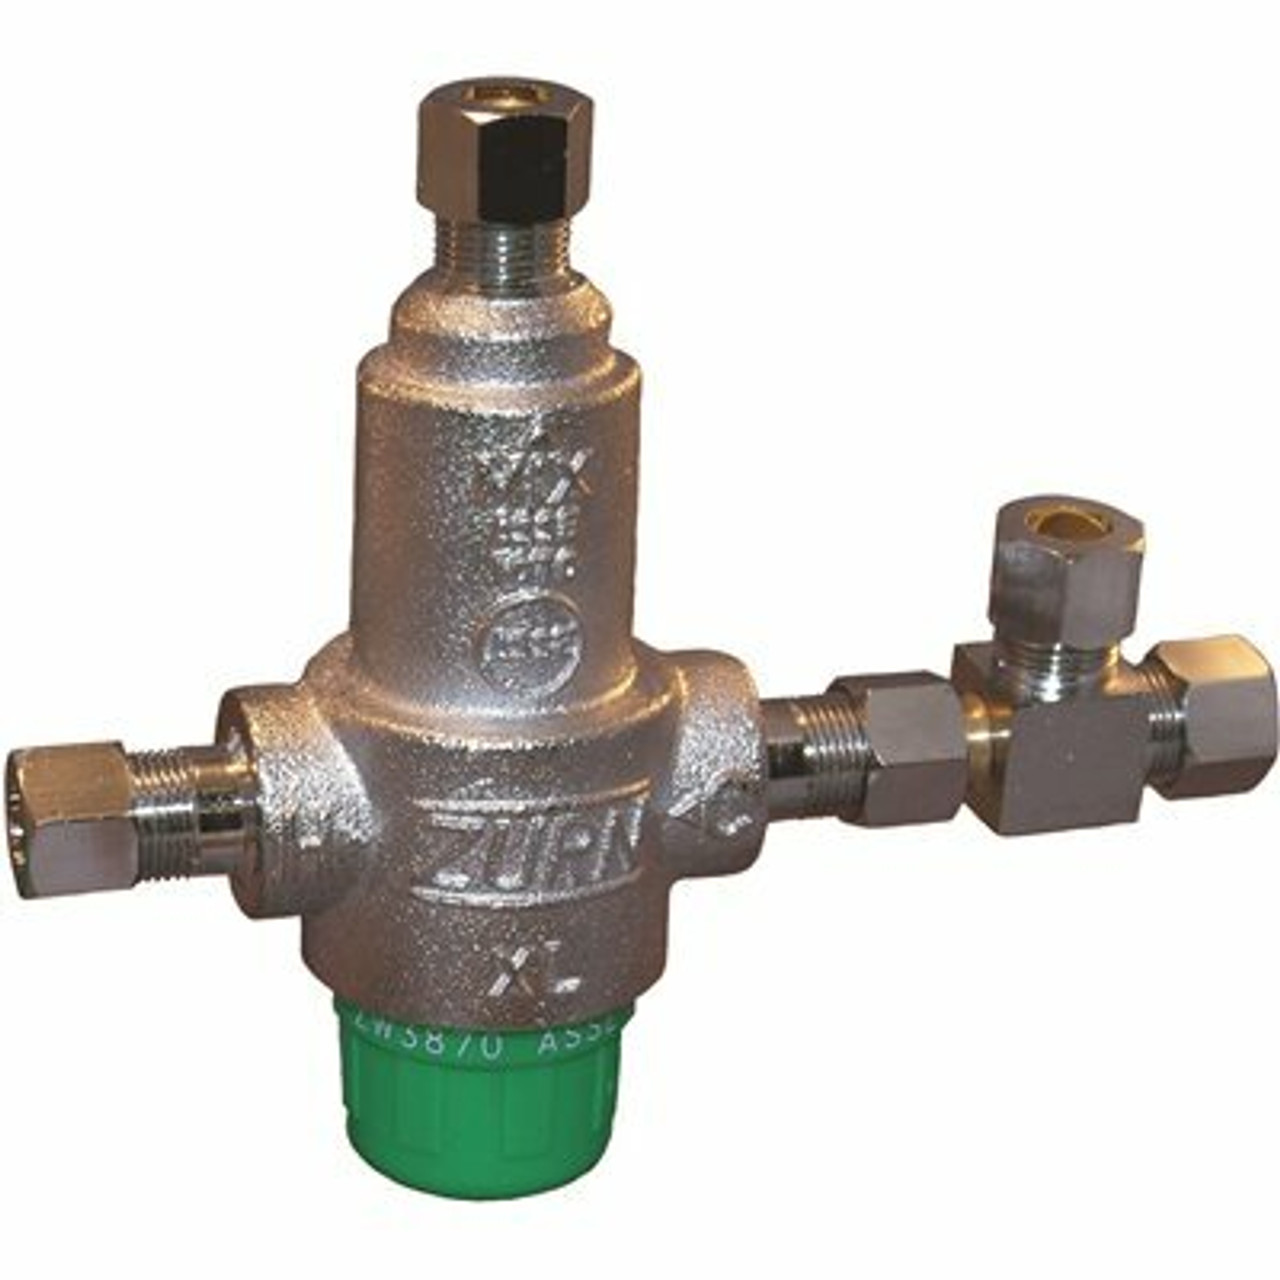 Zurn 3/8 In. Lead-Free Aqua-Gard Thermostatic Mixing Valve With 4 Port